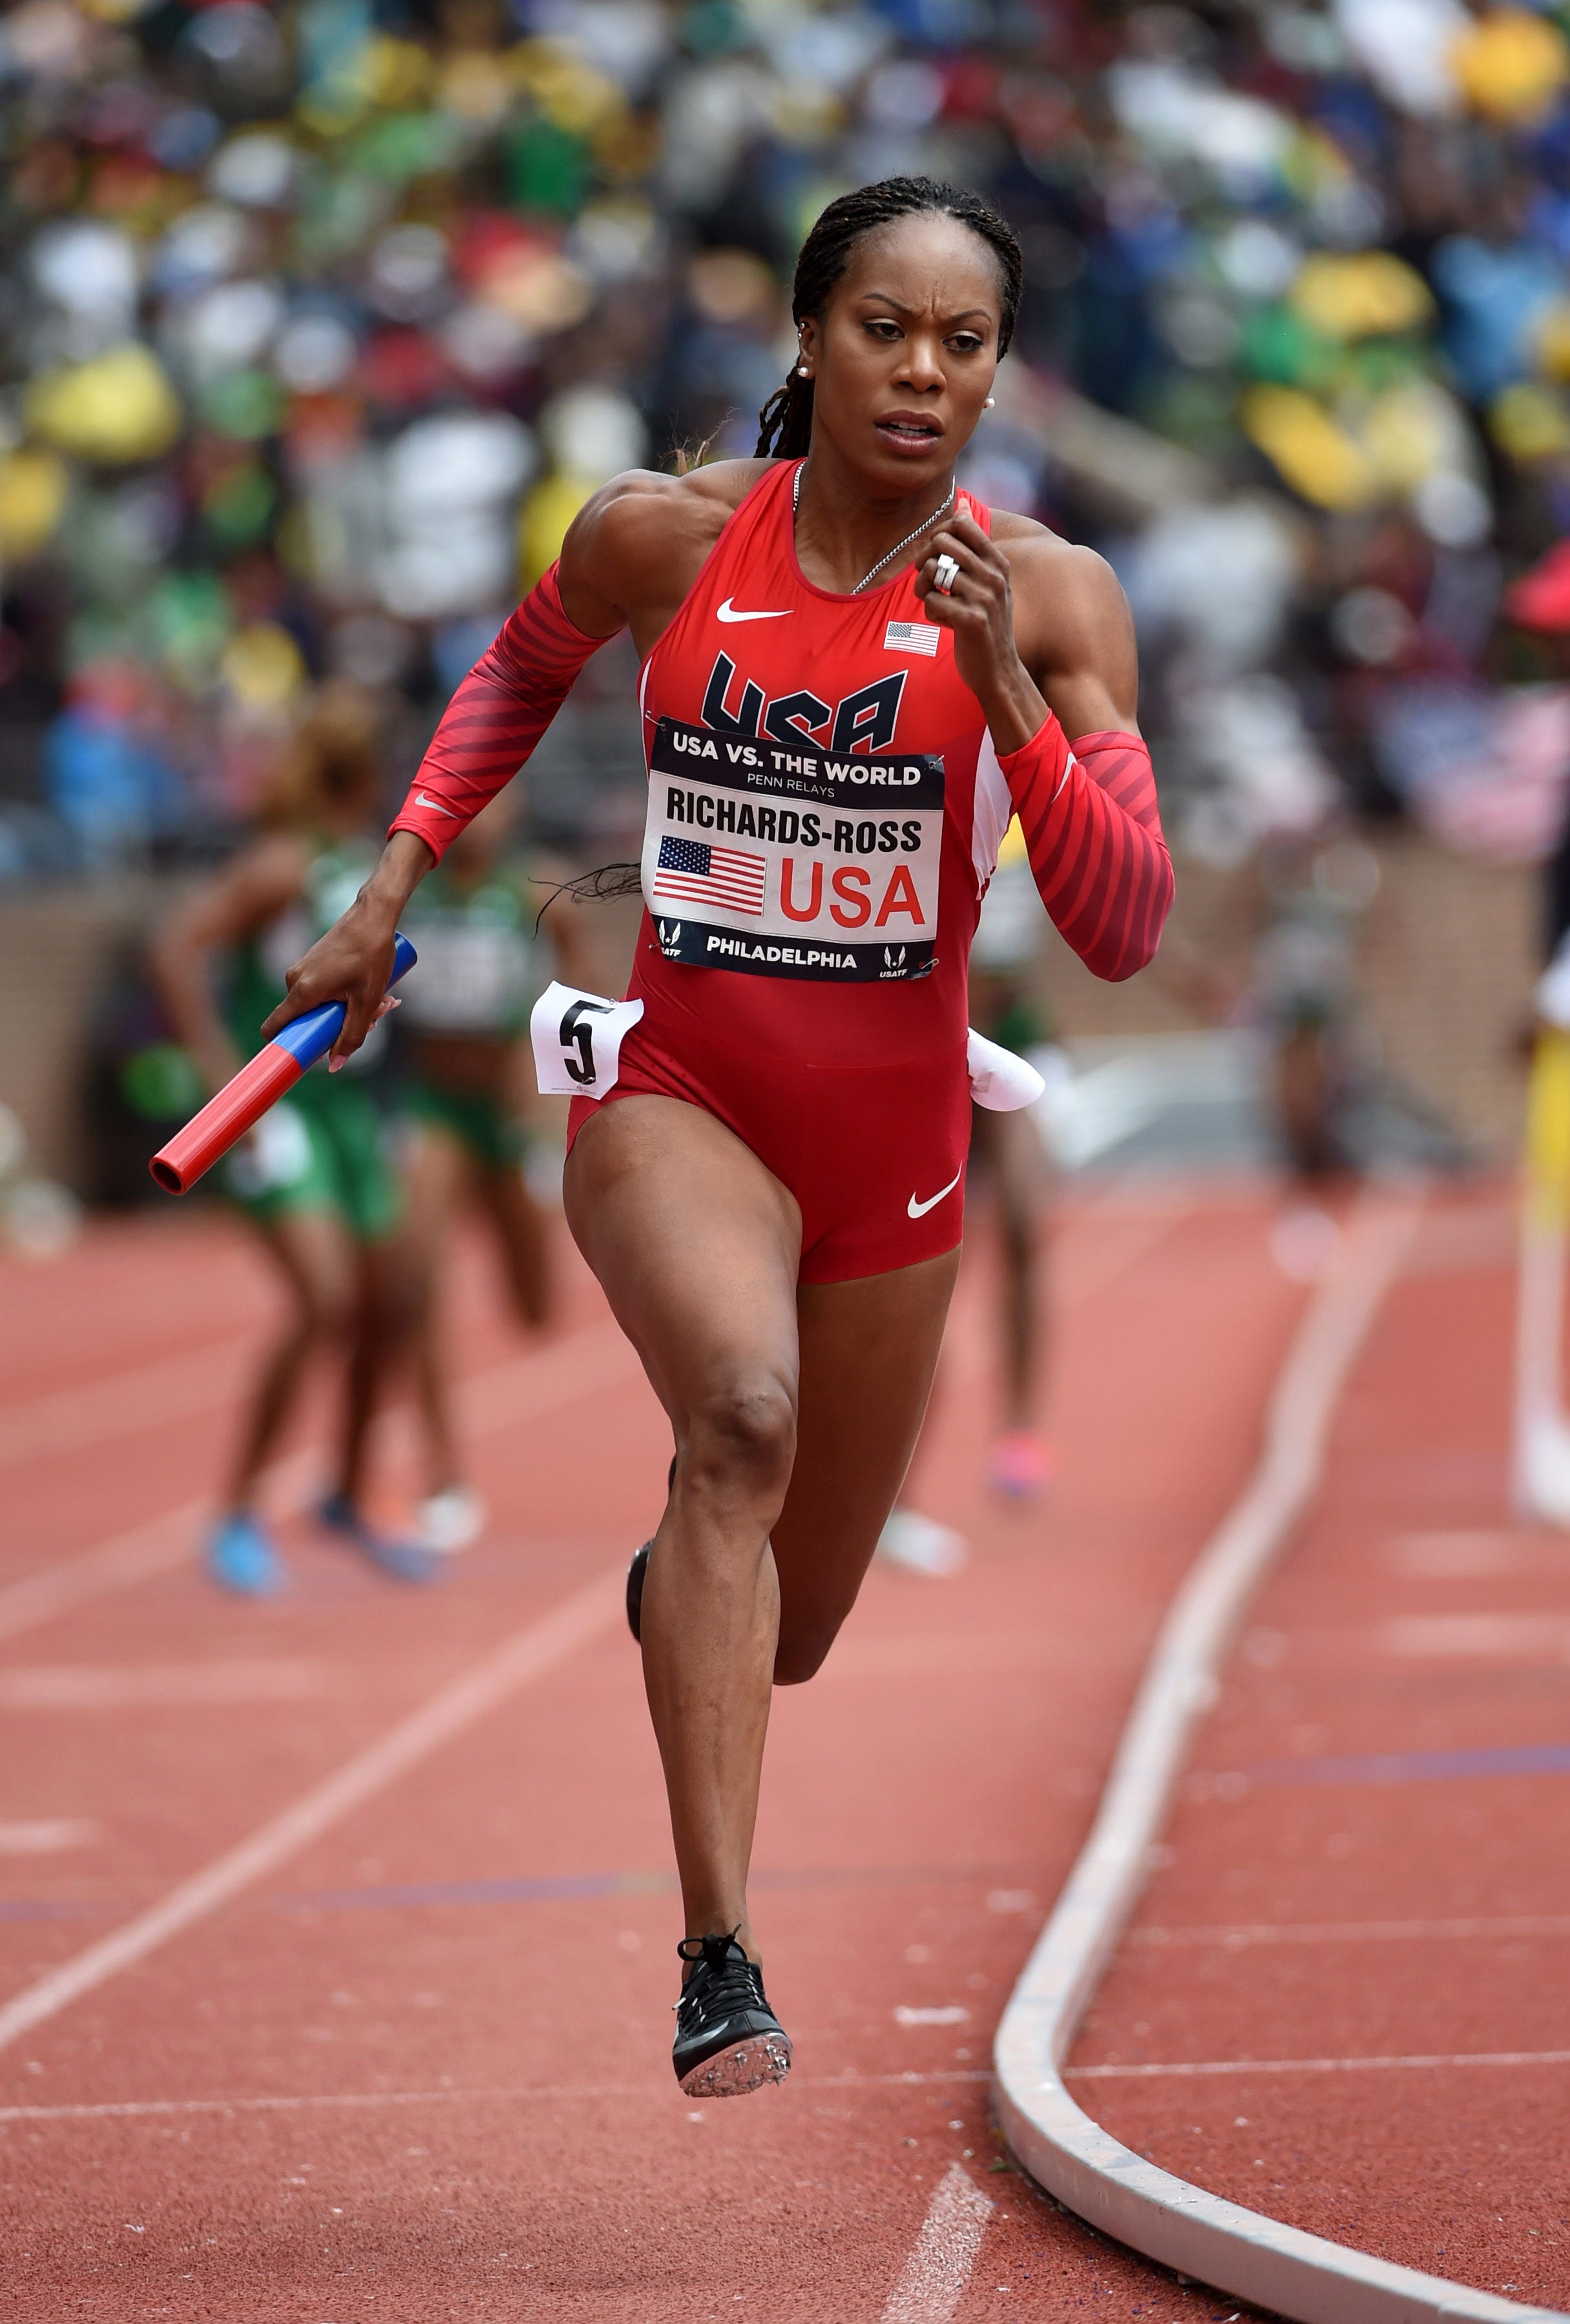 Sanya Richards-Ross runs the anchor leg on the United States women's 4 x 400m relay that won the USA vs. The World race in 3:26.83 during the 122nd Penn Relays at Franklin Field on Apr. 30, 2016.